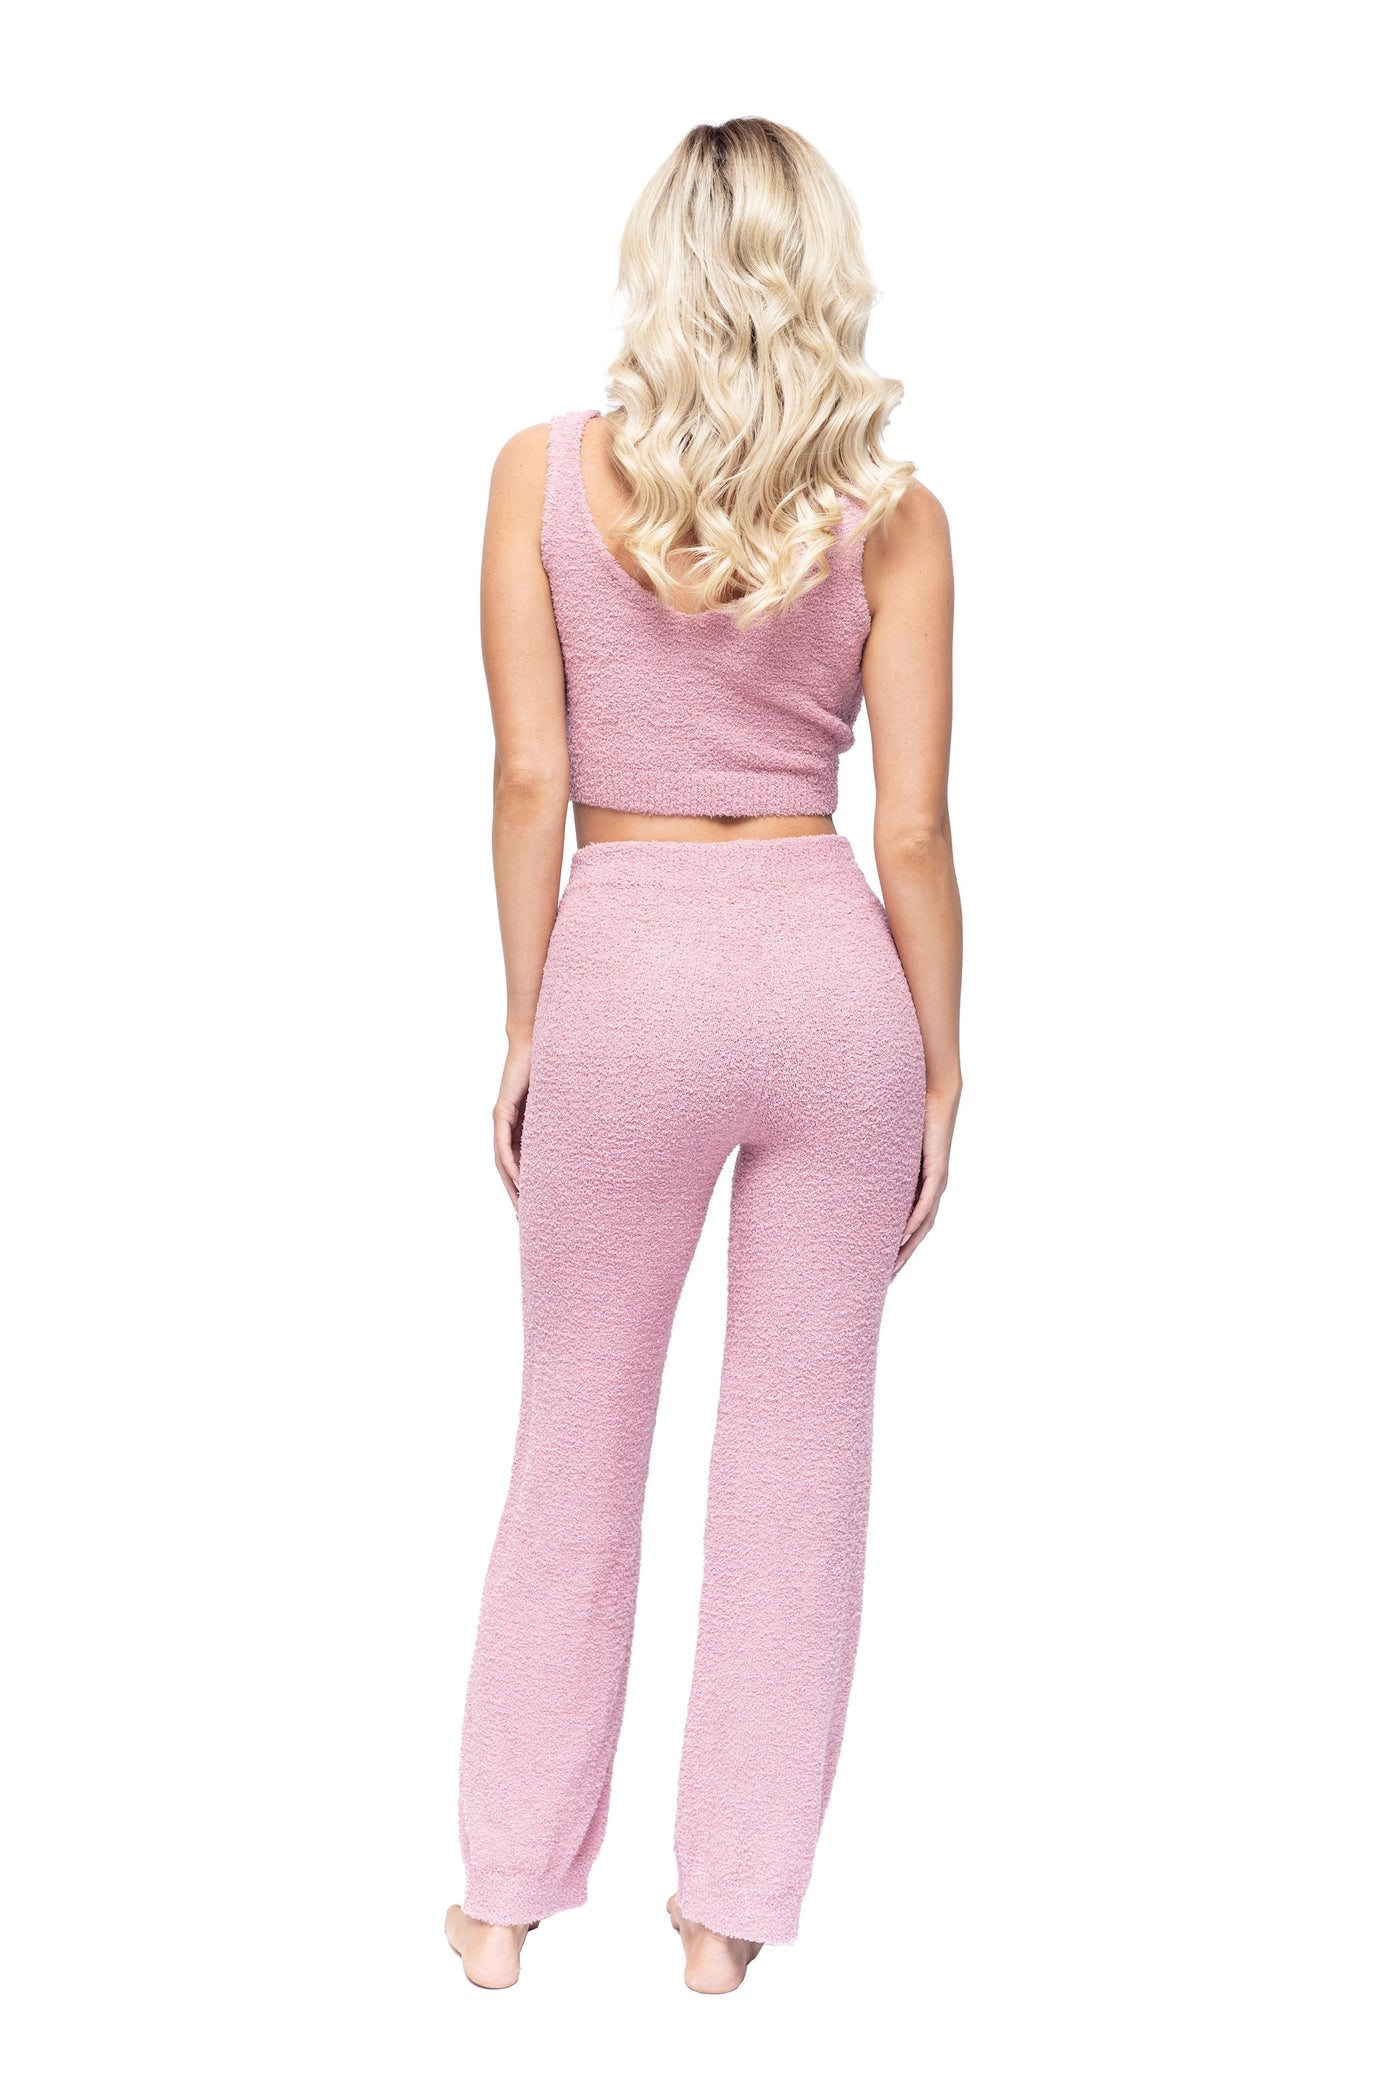 2 Piece Set. For Love of Lingerie Women's Ultra Luxurious Soft and Cozy Matching Tank Top and Pants Loungewear Set - Pink - Small, Medium, Large. 